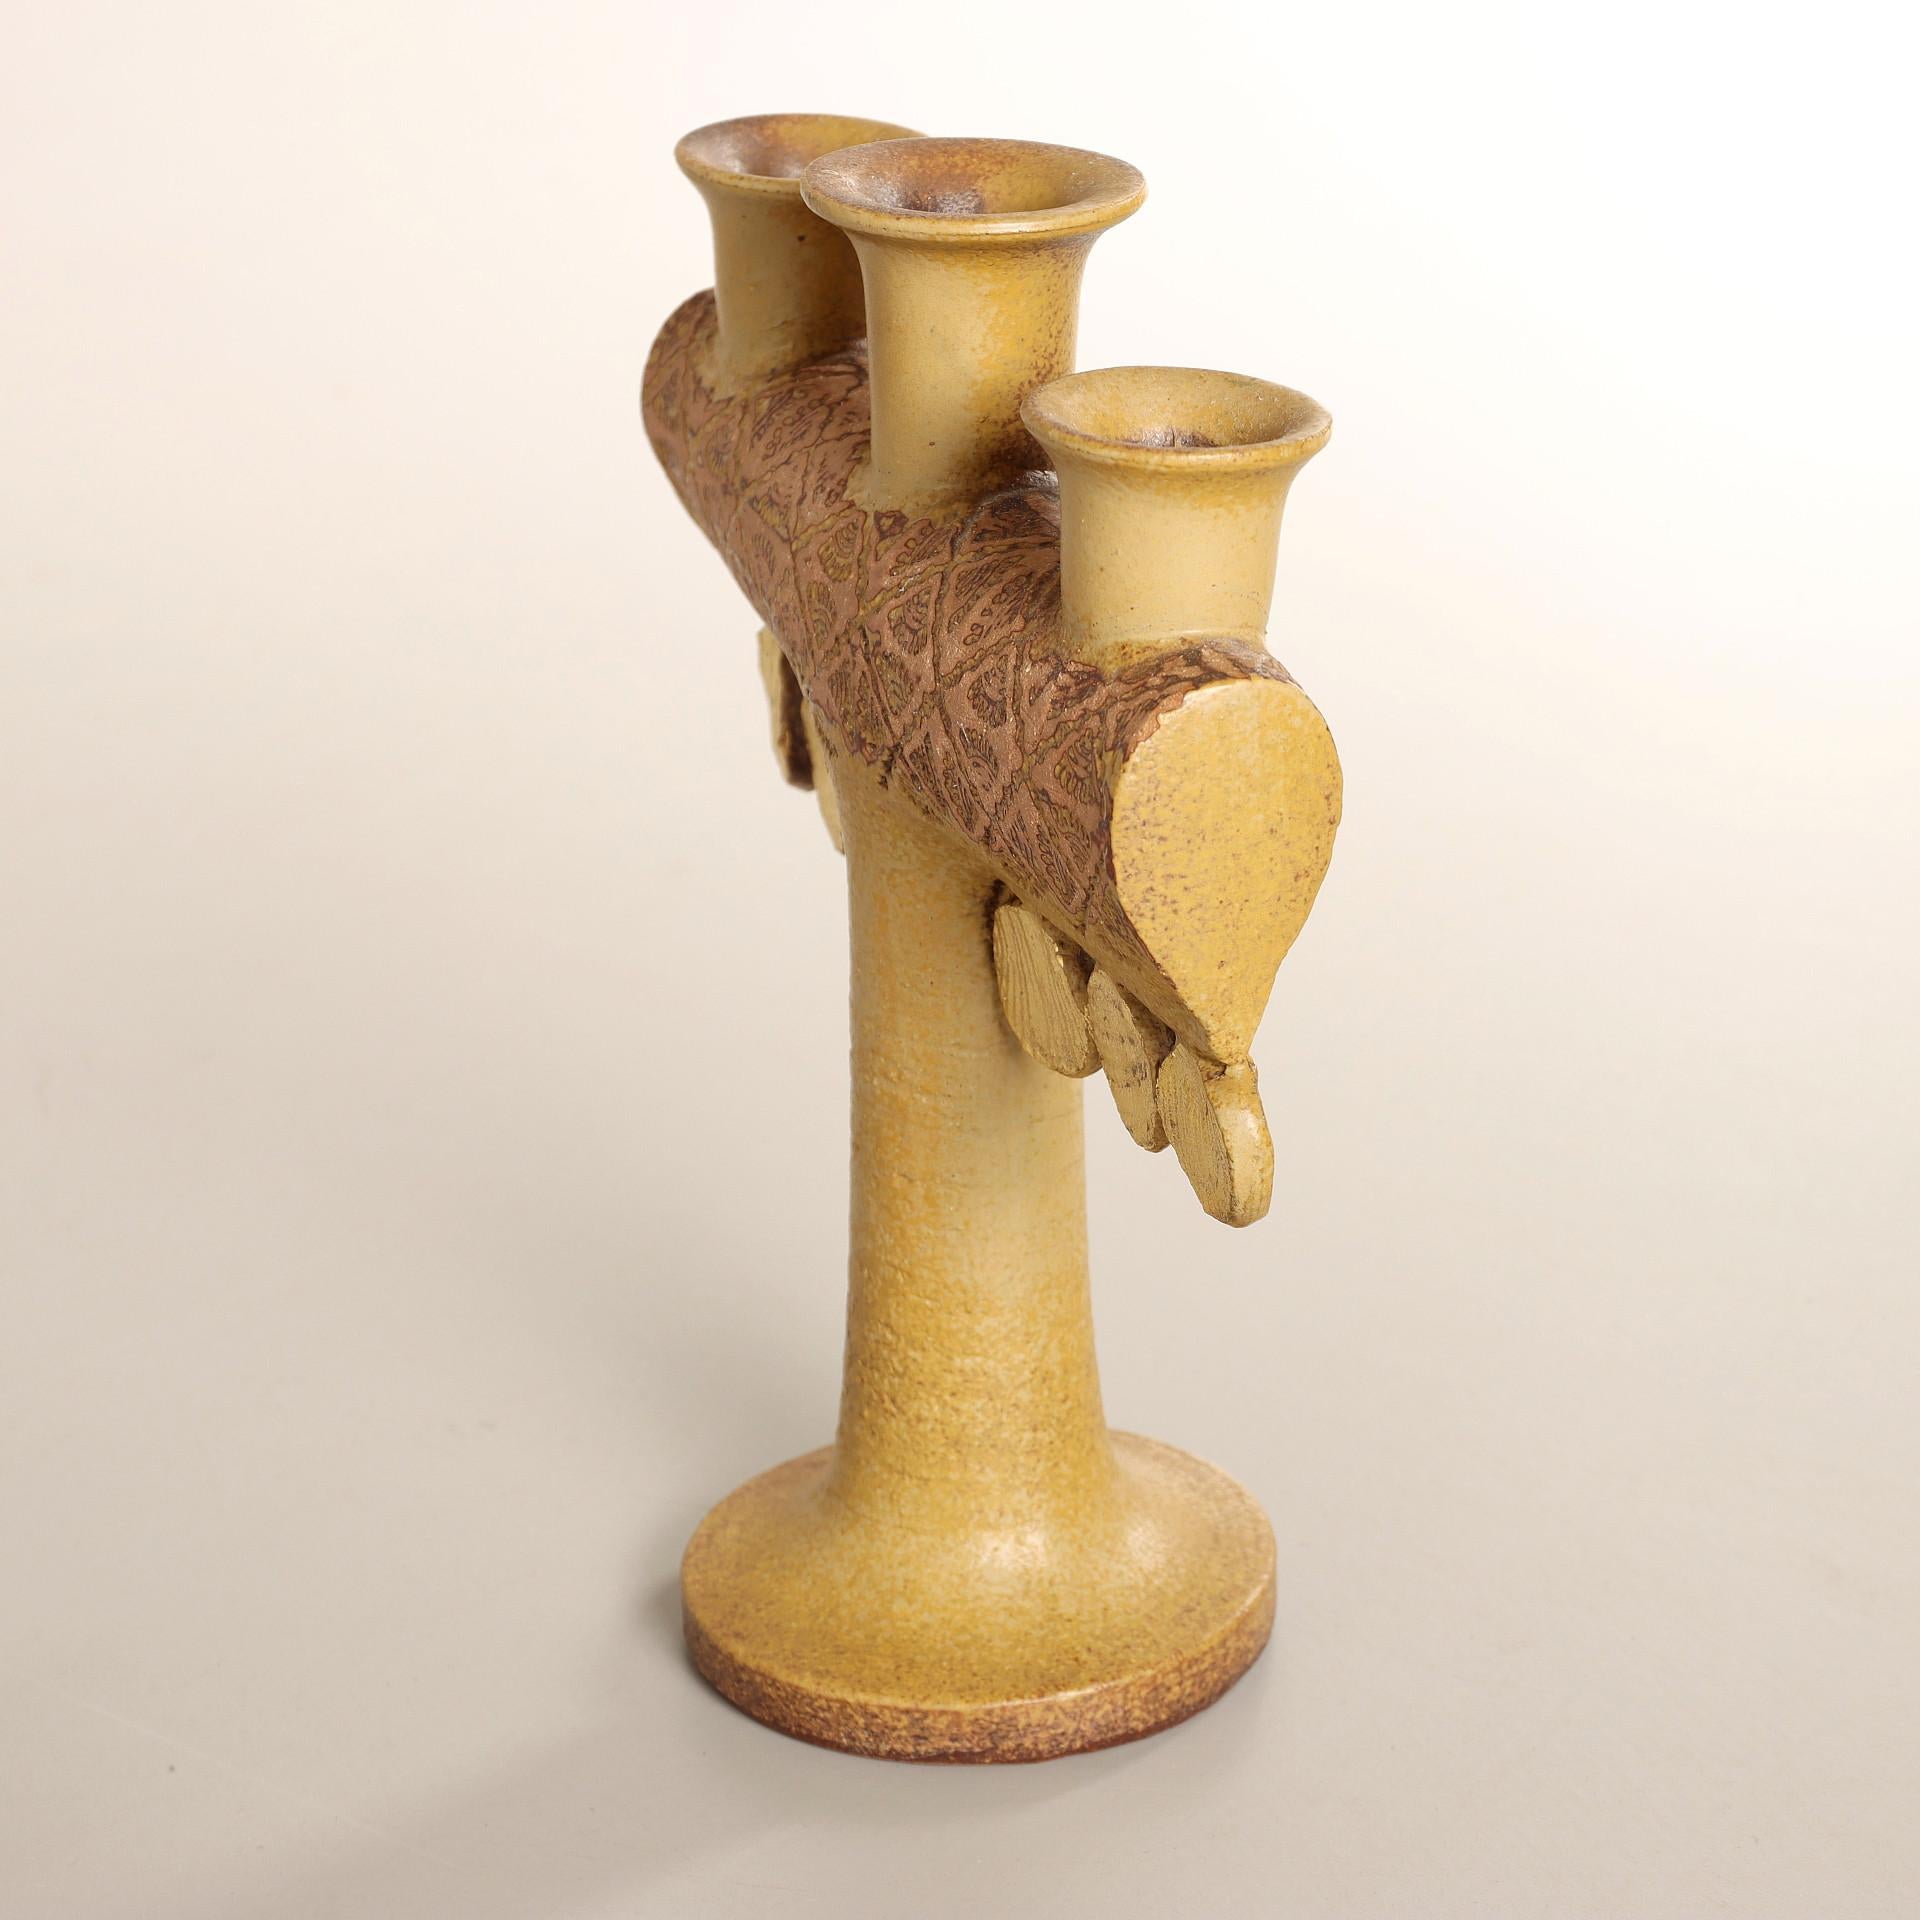 Candlestick, 3-armed, 